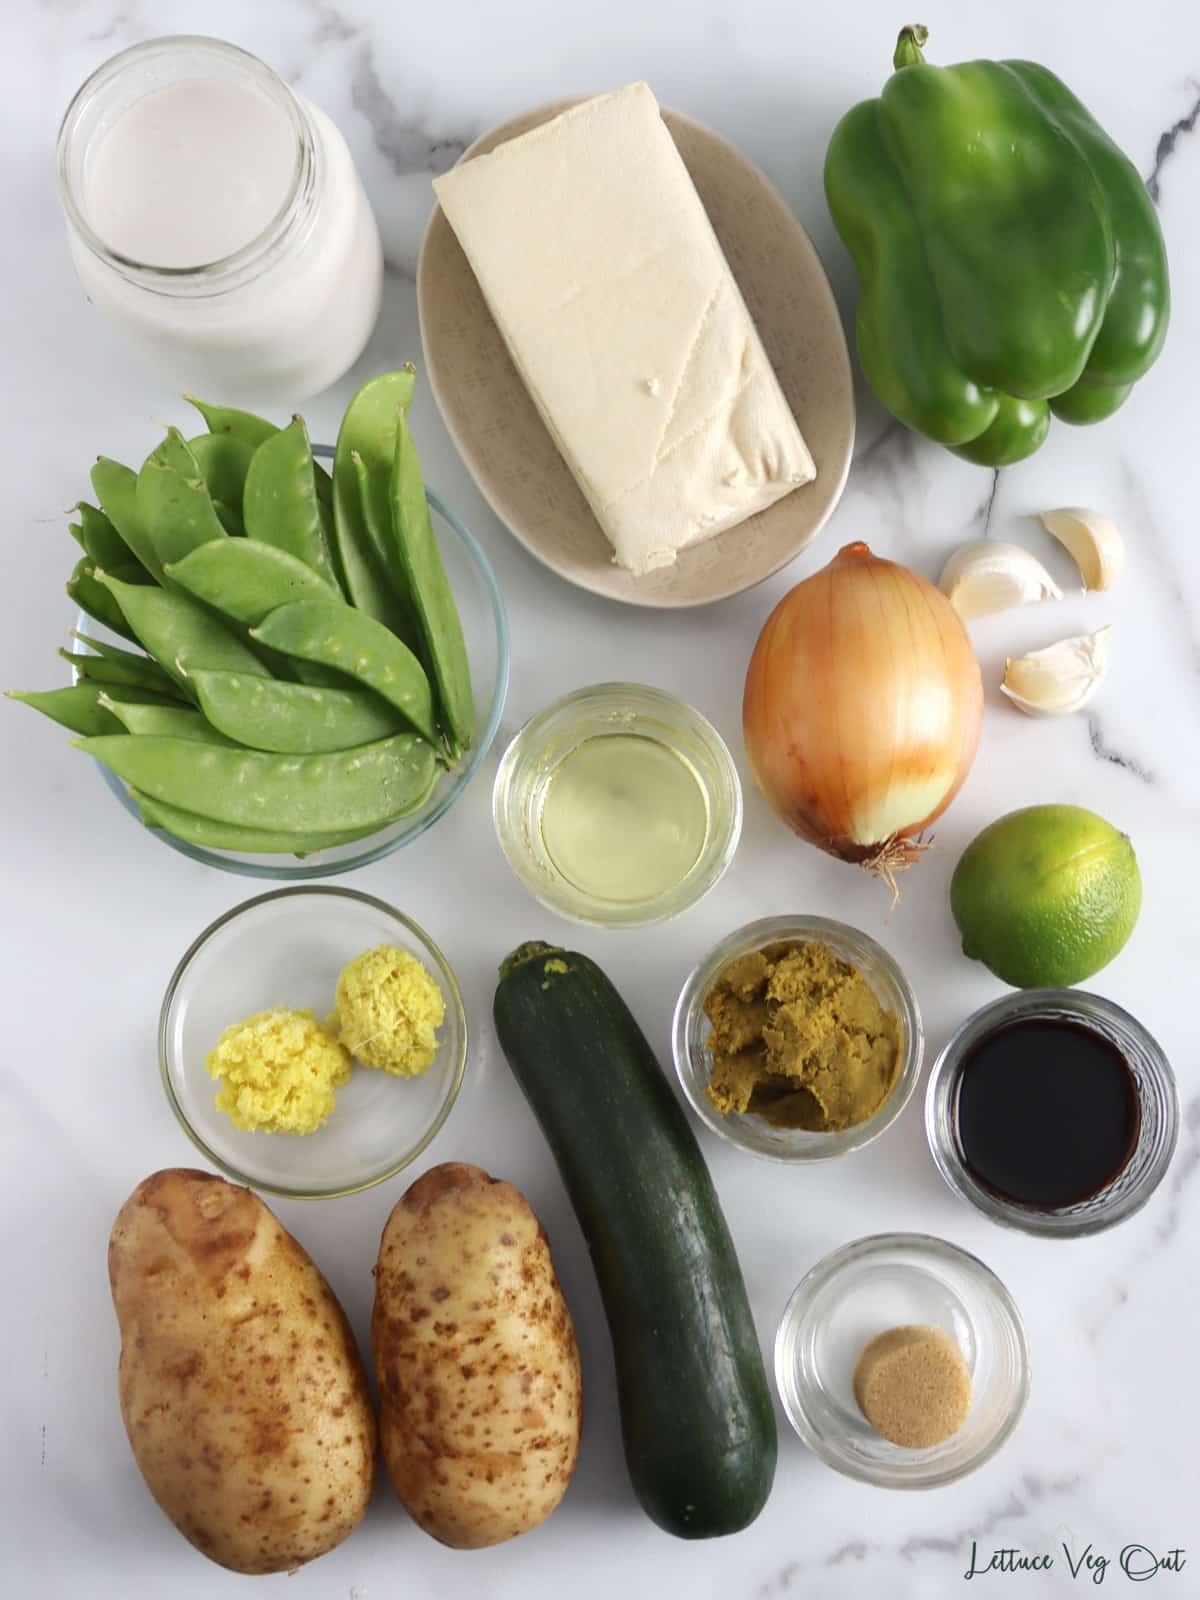 Arrangement of ingredients for green tofu curry.